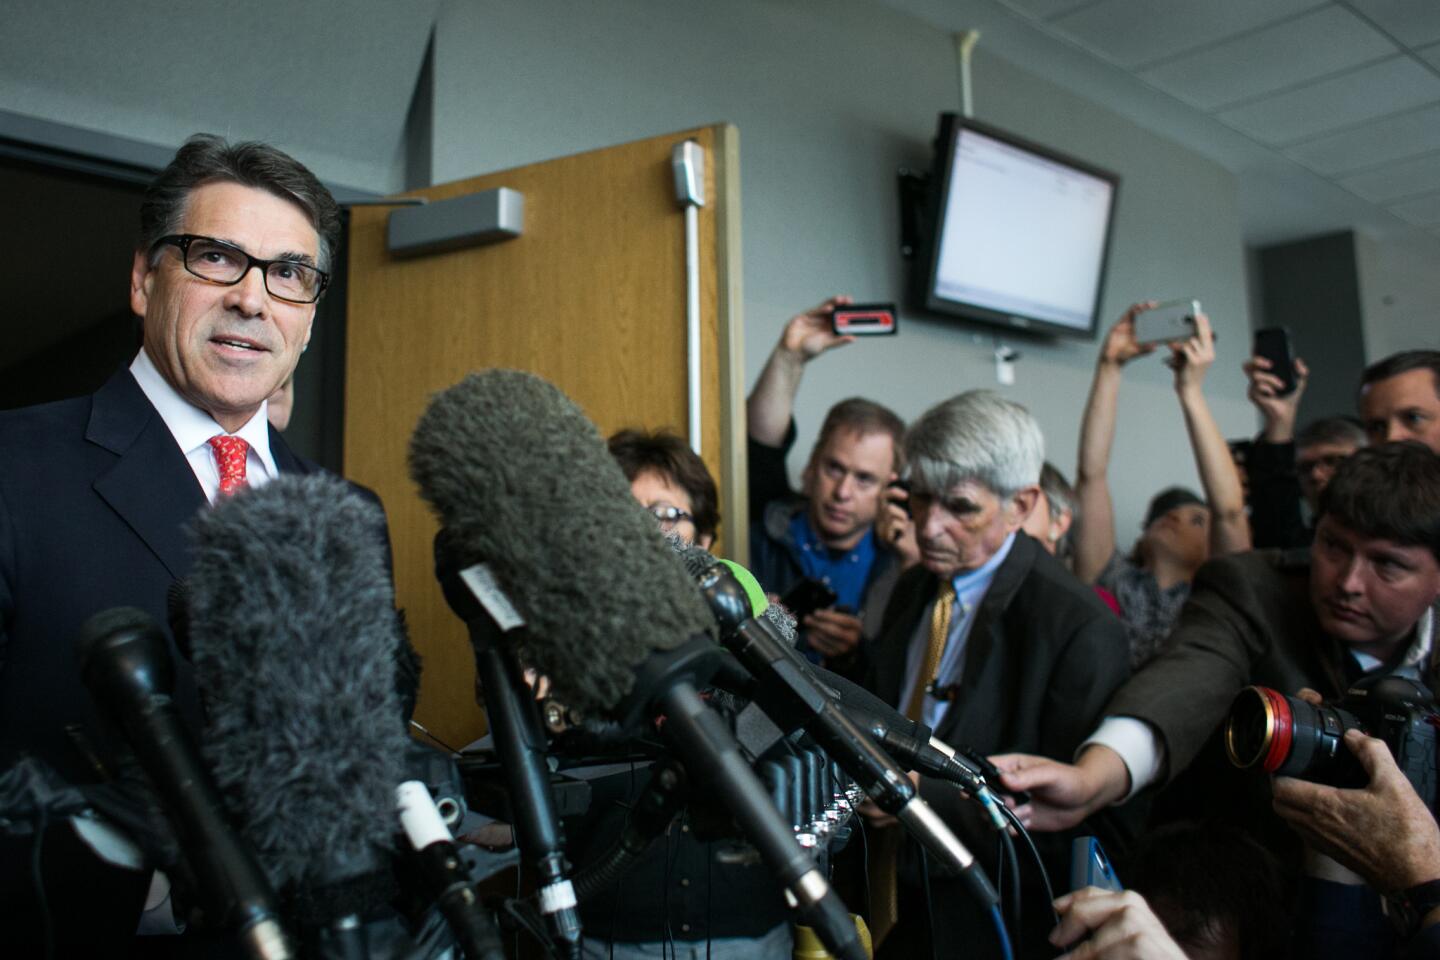 Texas Governor Rick Perry answers questions from members of the media at the Blackwell-Thurman Criminal Justice Center on November 6, 2014 in Austin, Texas.